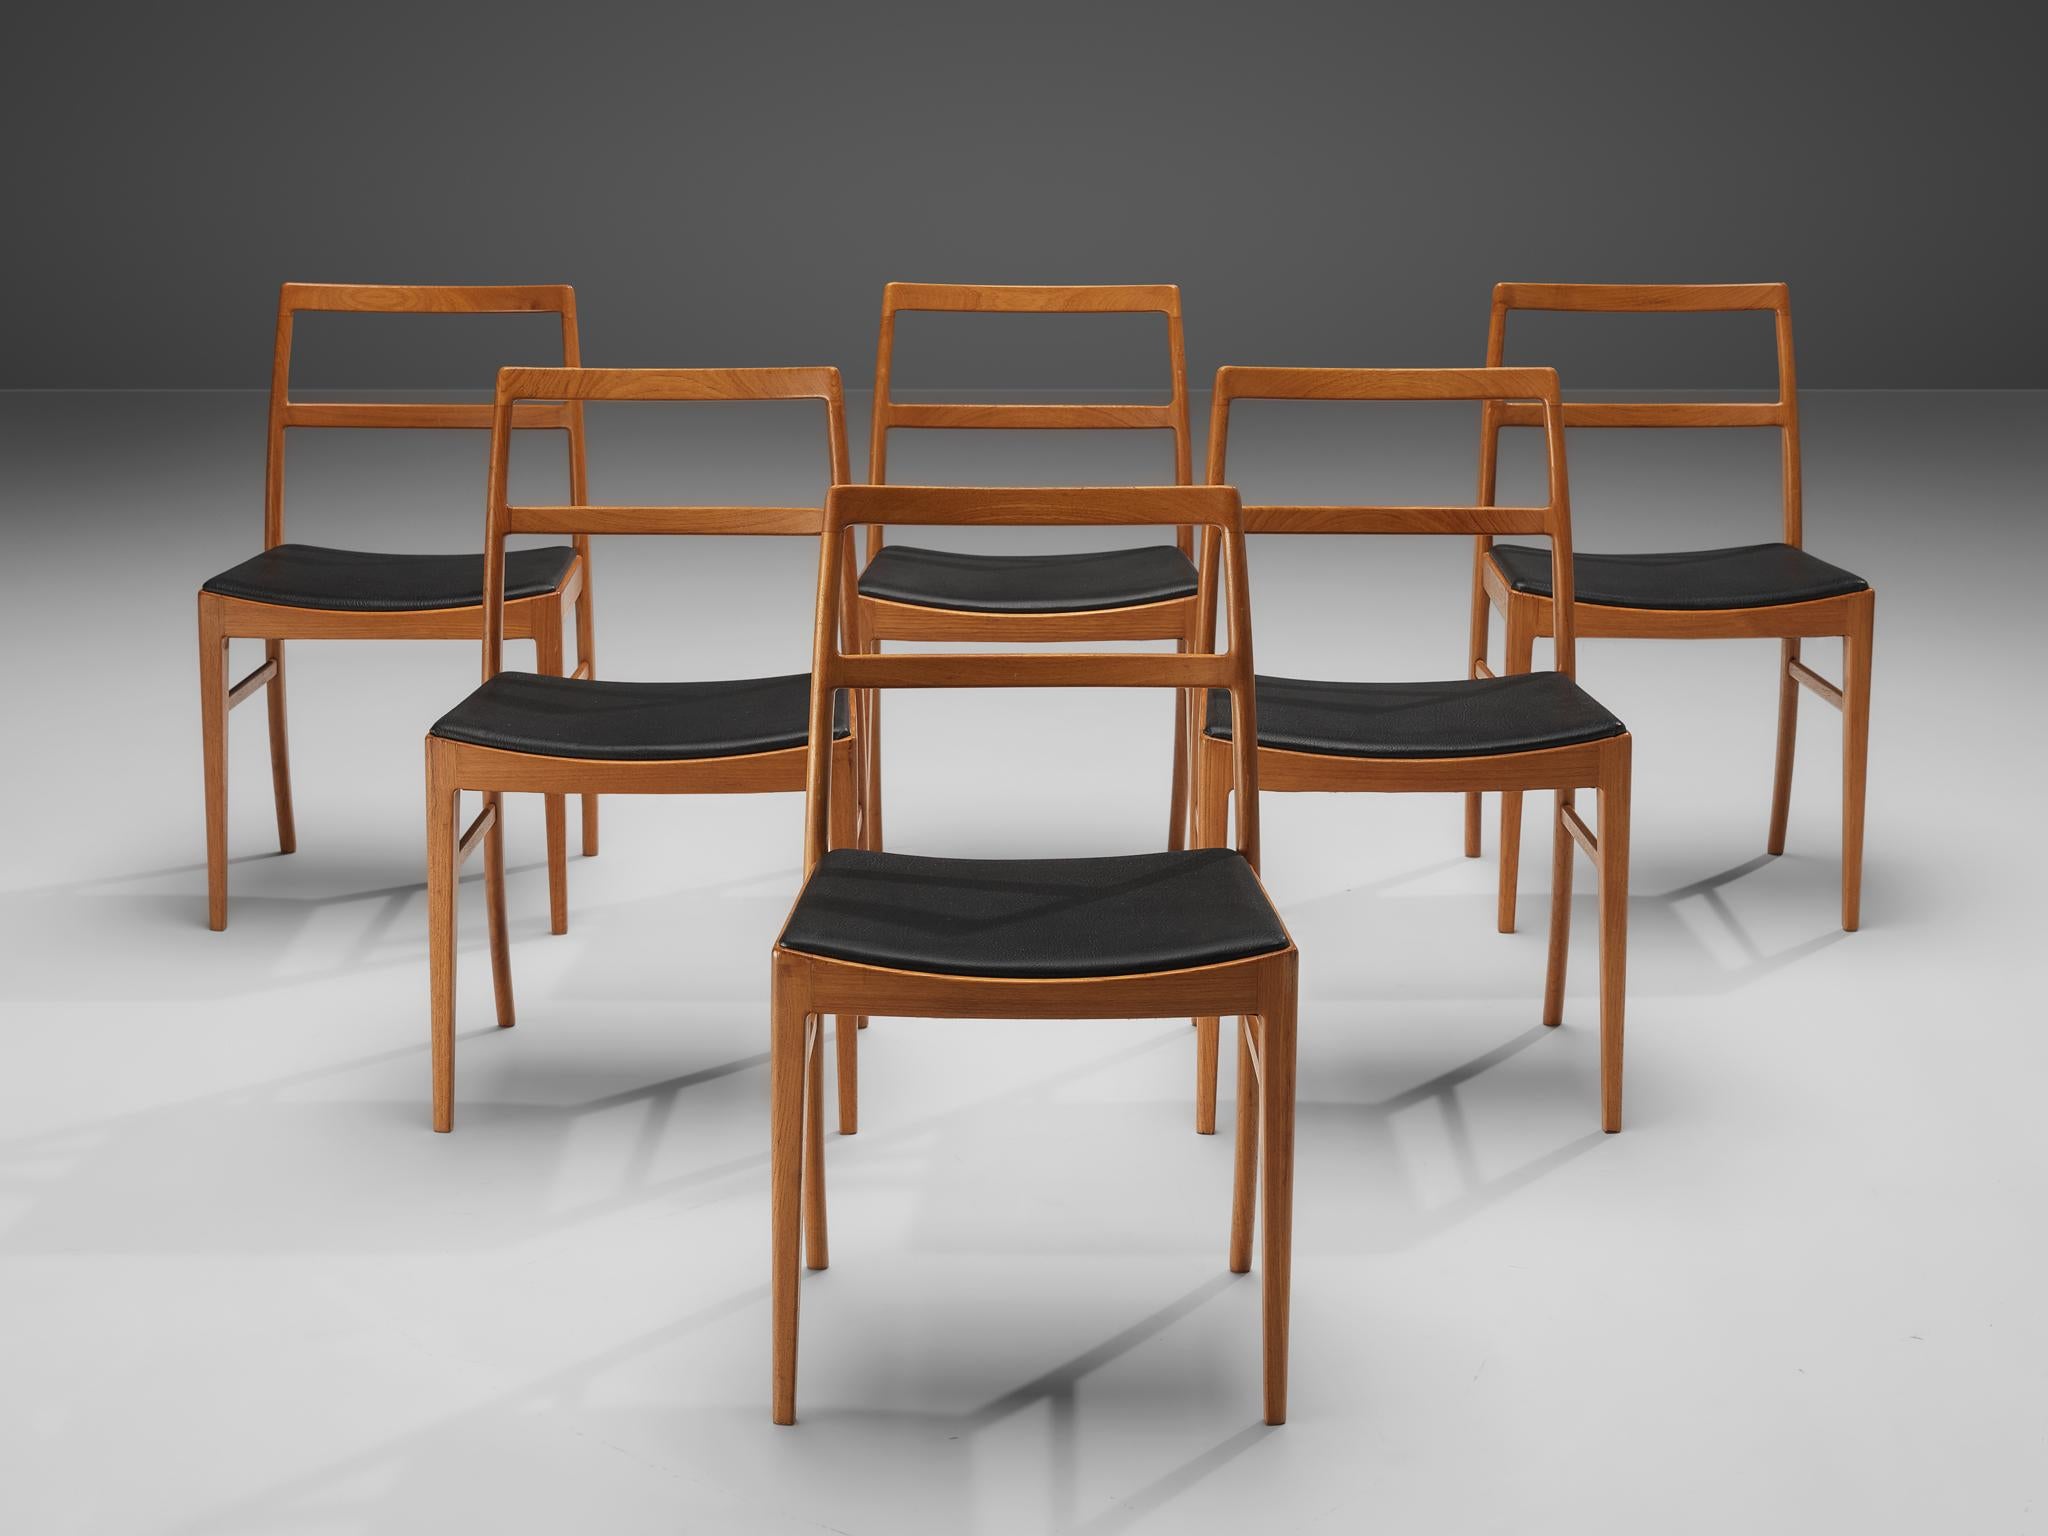 Arne Vodder for Sibast Møbler, set of six dining chairs model 430, teak, black leather, Denmark, 1960s. 

The basic and linear design gives these chairs a feel of lightness. The wood joints and rounded edges show great craftsmanship and attention to